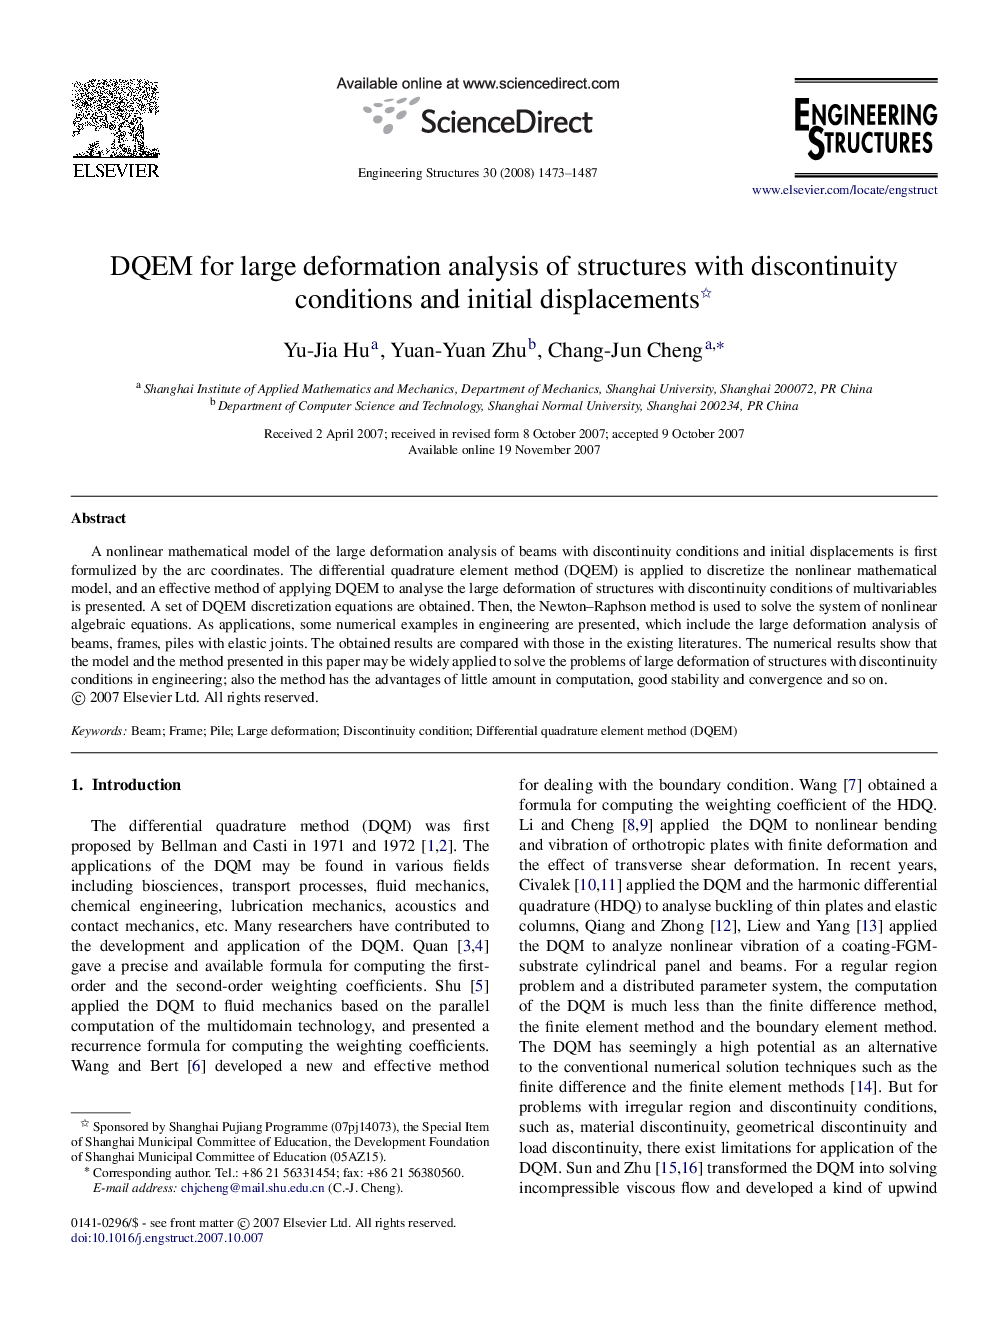 DQEM for large deformation analysis of structures with discontinuity conditions and initial displacements 